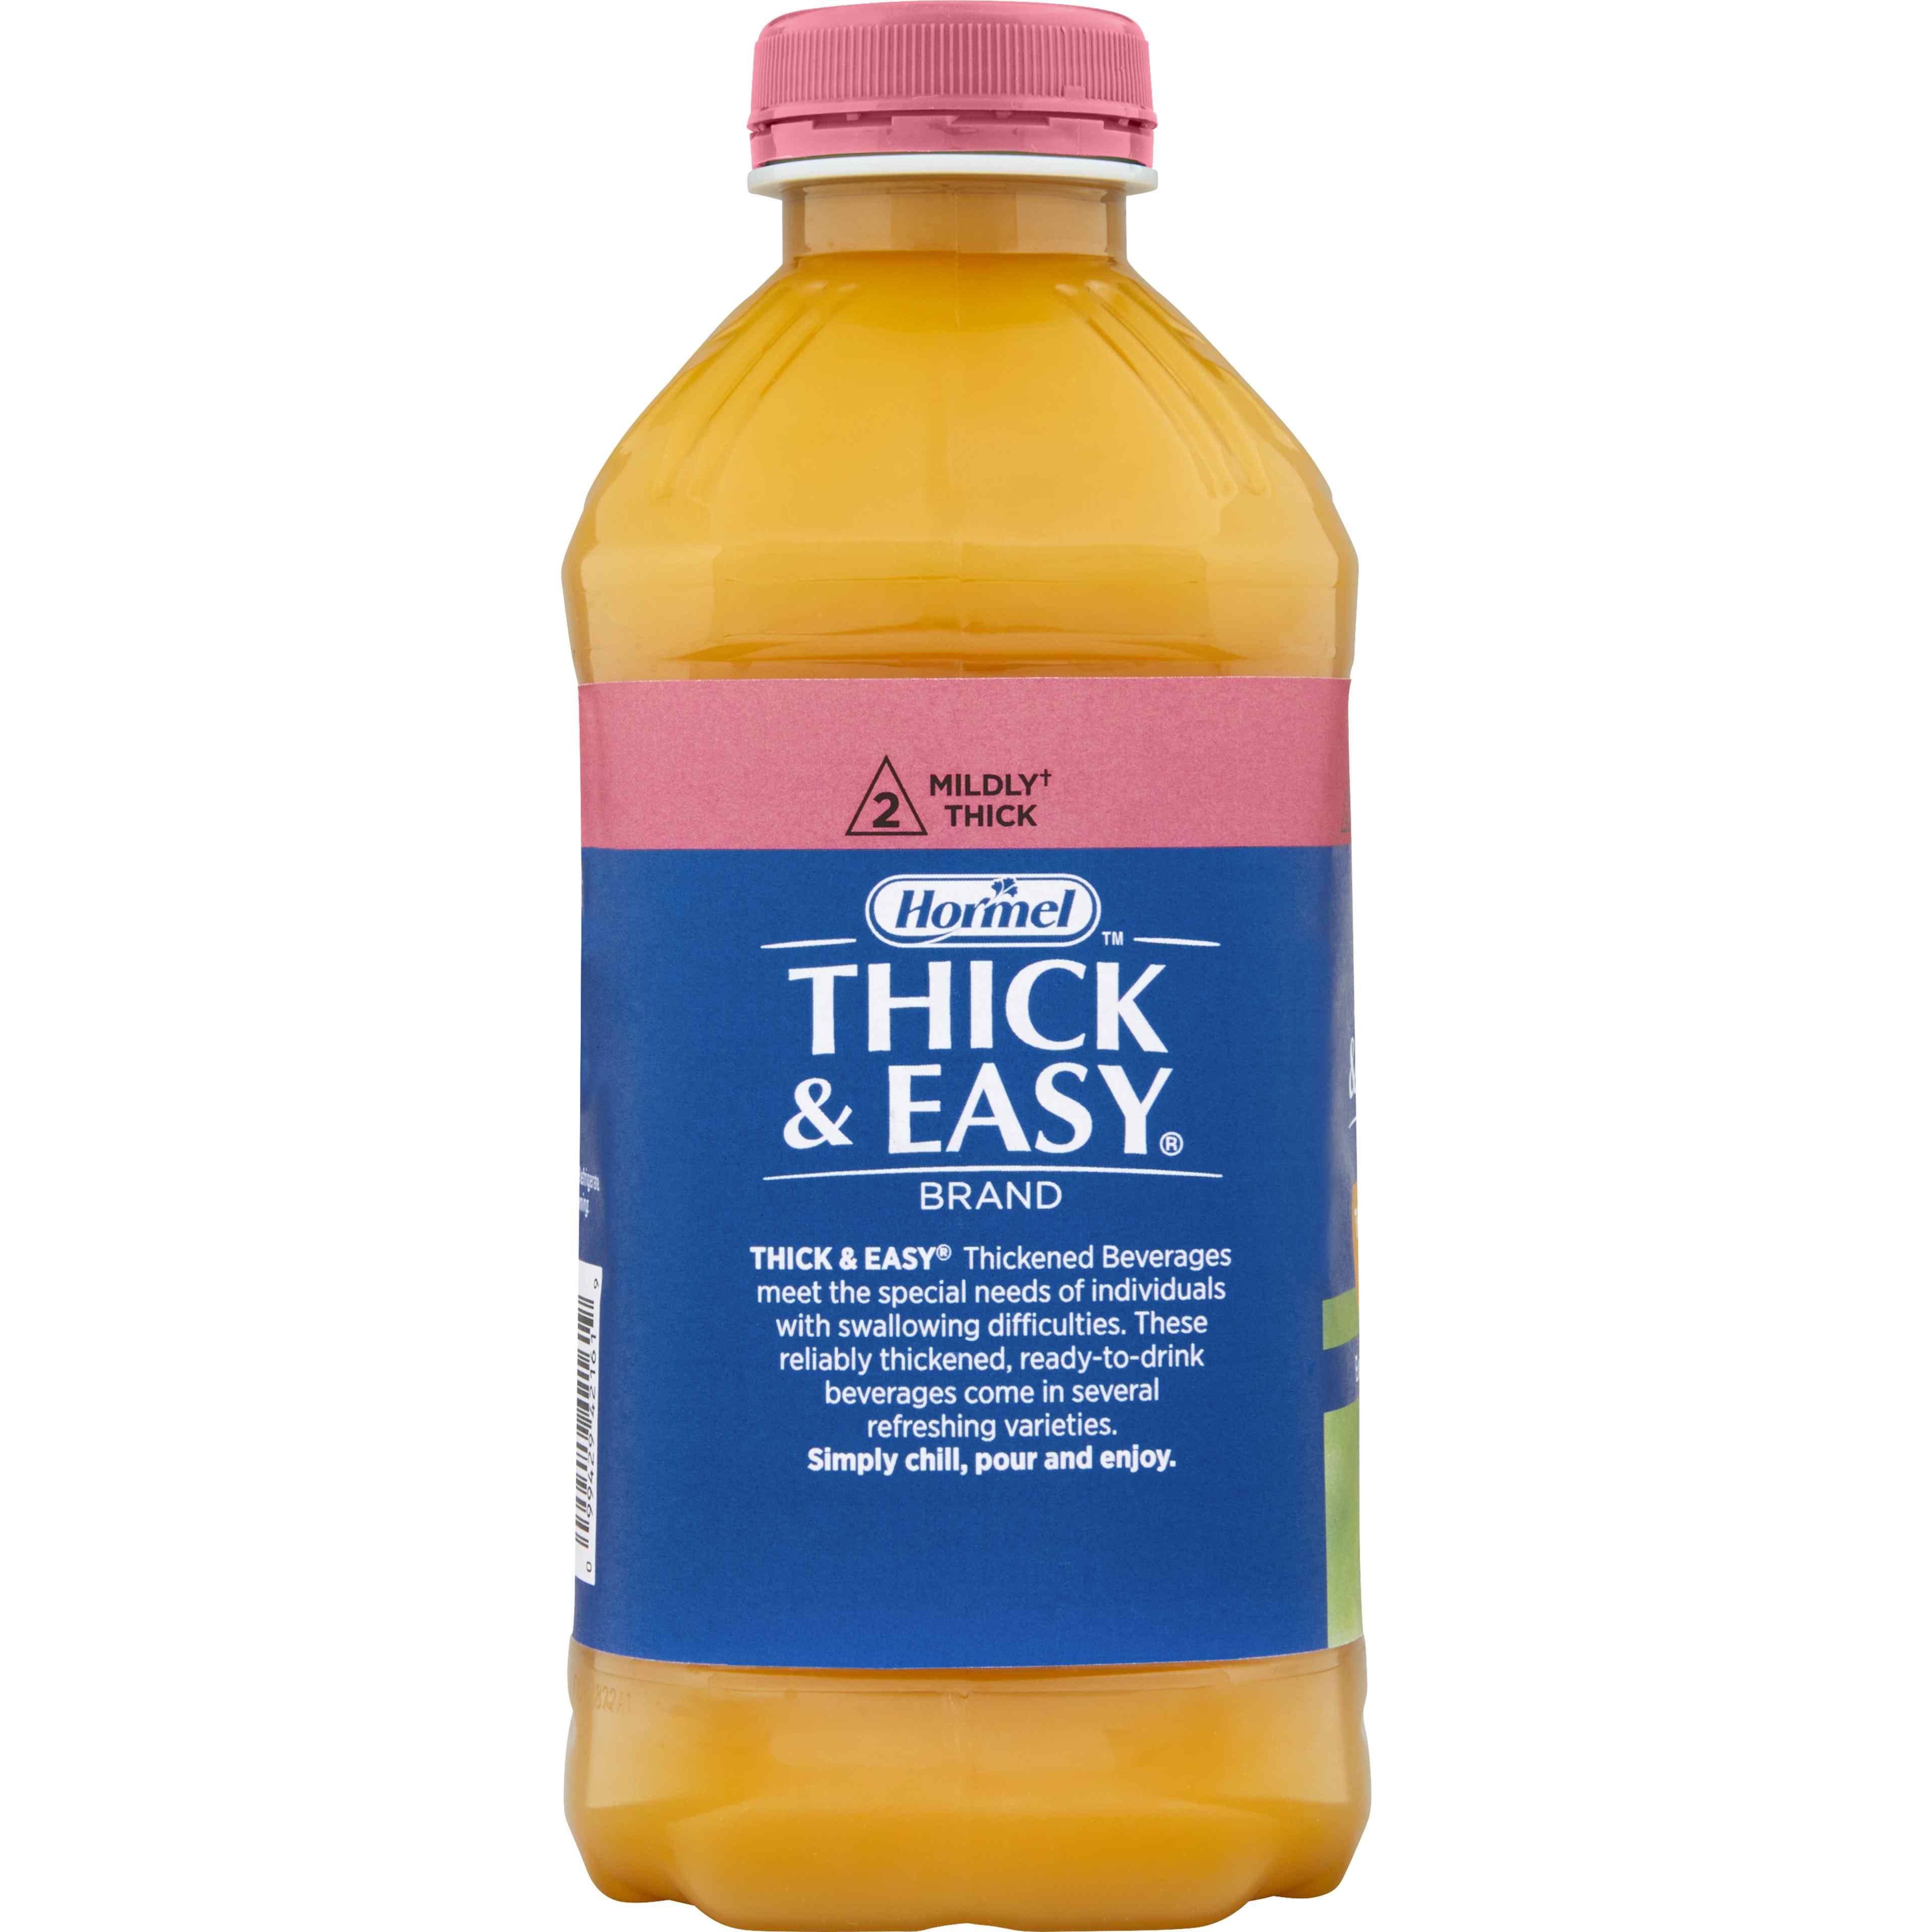 Thick & Easy Ready to Use Thickened Beverage, Orange Juice Flavor, 46 oz., Bottle